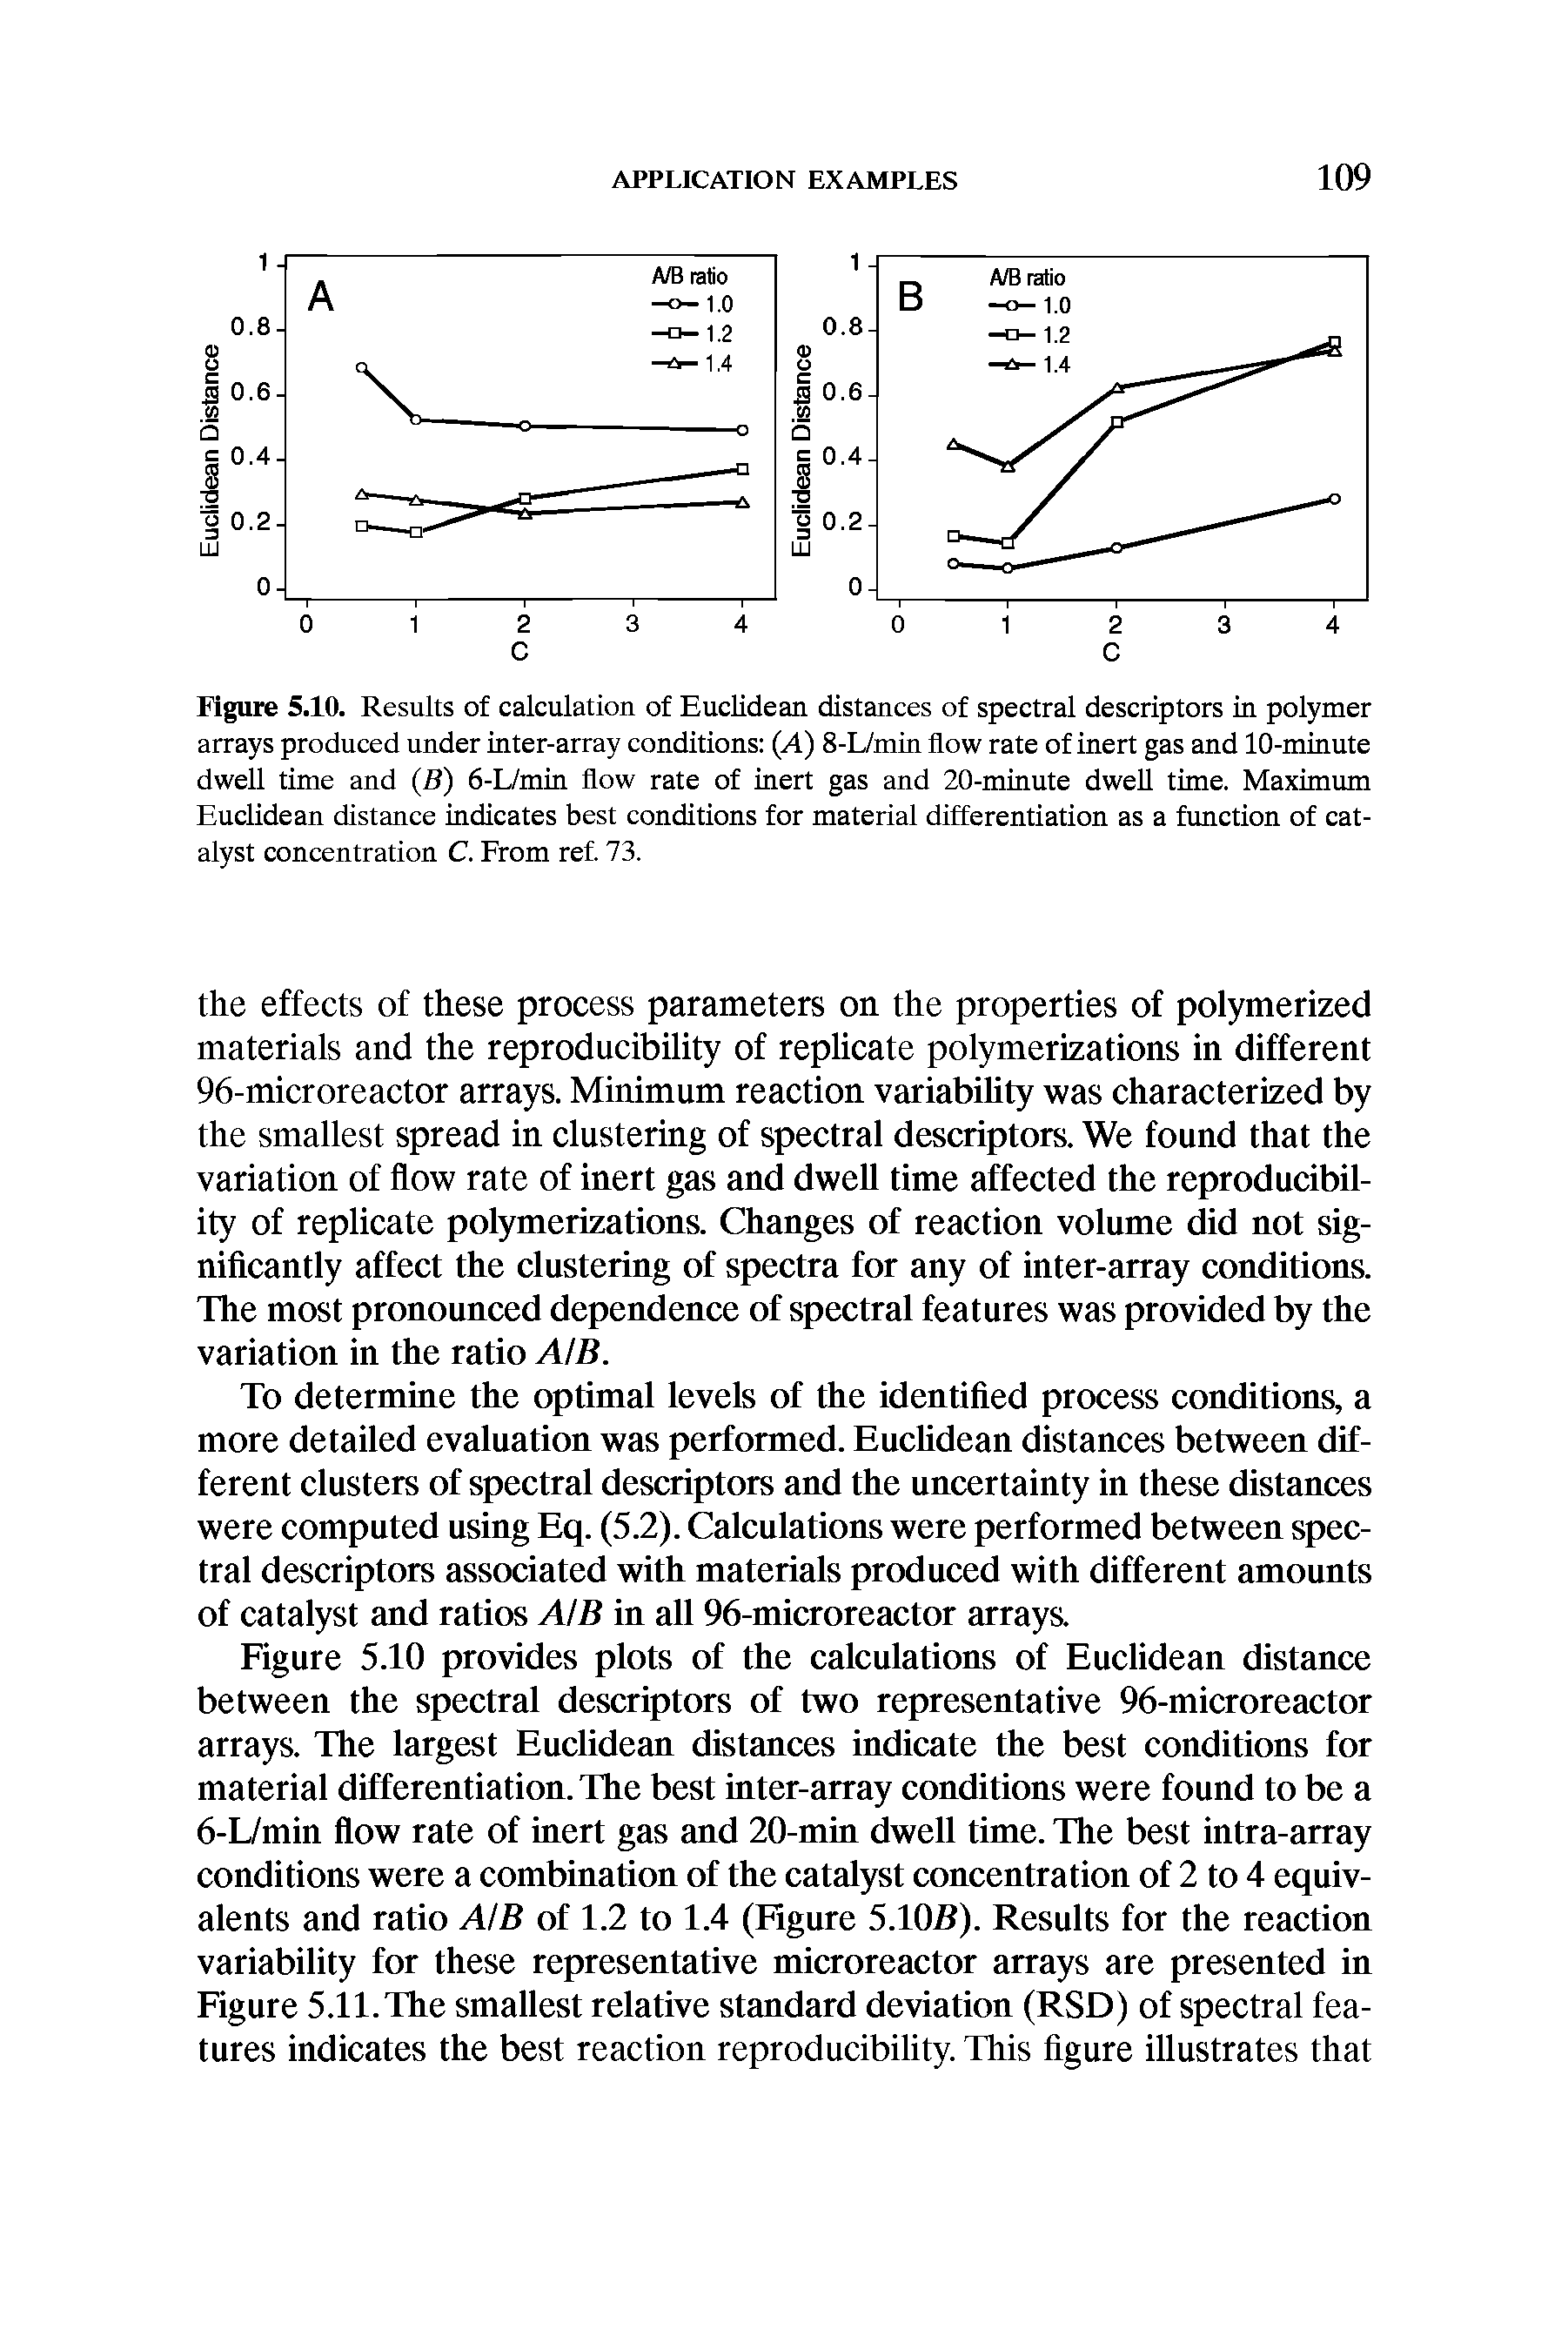 Figure 5.10 provides plots of the calculations of Euclidean distance between the spectral descriptors of two representative 96-microreactor arrays. The largest Euclidean distances indicate the best conditions for material differentiation. The best inter-array conditions were found to be a 6-L/min flow rate of inert gas and 20-min dwell time. The best intra-array conditions were a combination of the catalyst concentration of 2 to 4 equivalents and ratio AIB of 1.2 to 1.4 (Figure 5.10B). Results for the reaction variability for these representative microreactor arrays are presented in Figure 5.11.The smallest relative standard deviation (RSD) of spectral features indicates the best reaction reproducibihty. This figure illustrates that...